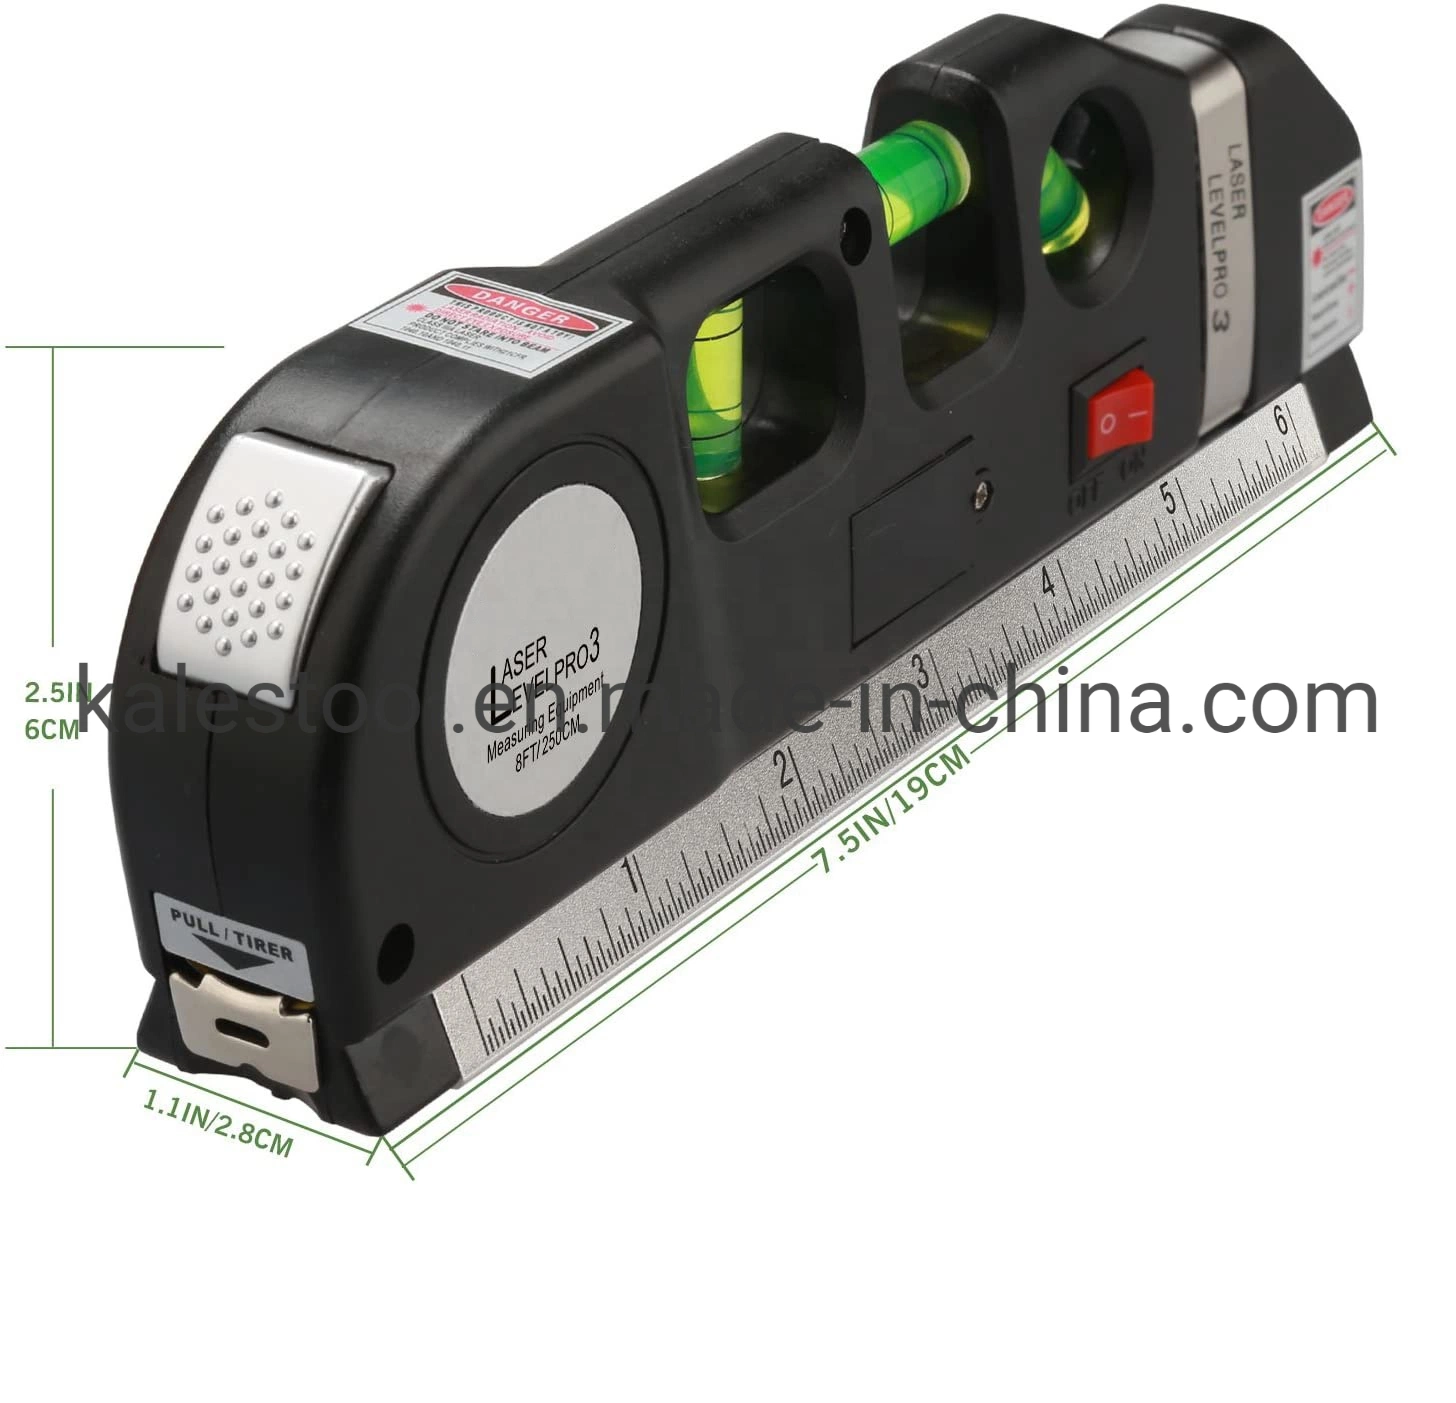 High Precision Measurement Multi-Function Laser Level with Tape Measures Laser Multifunction Measuring Ruler The Quality Life